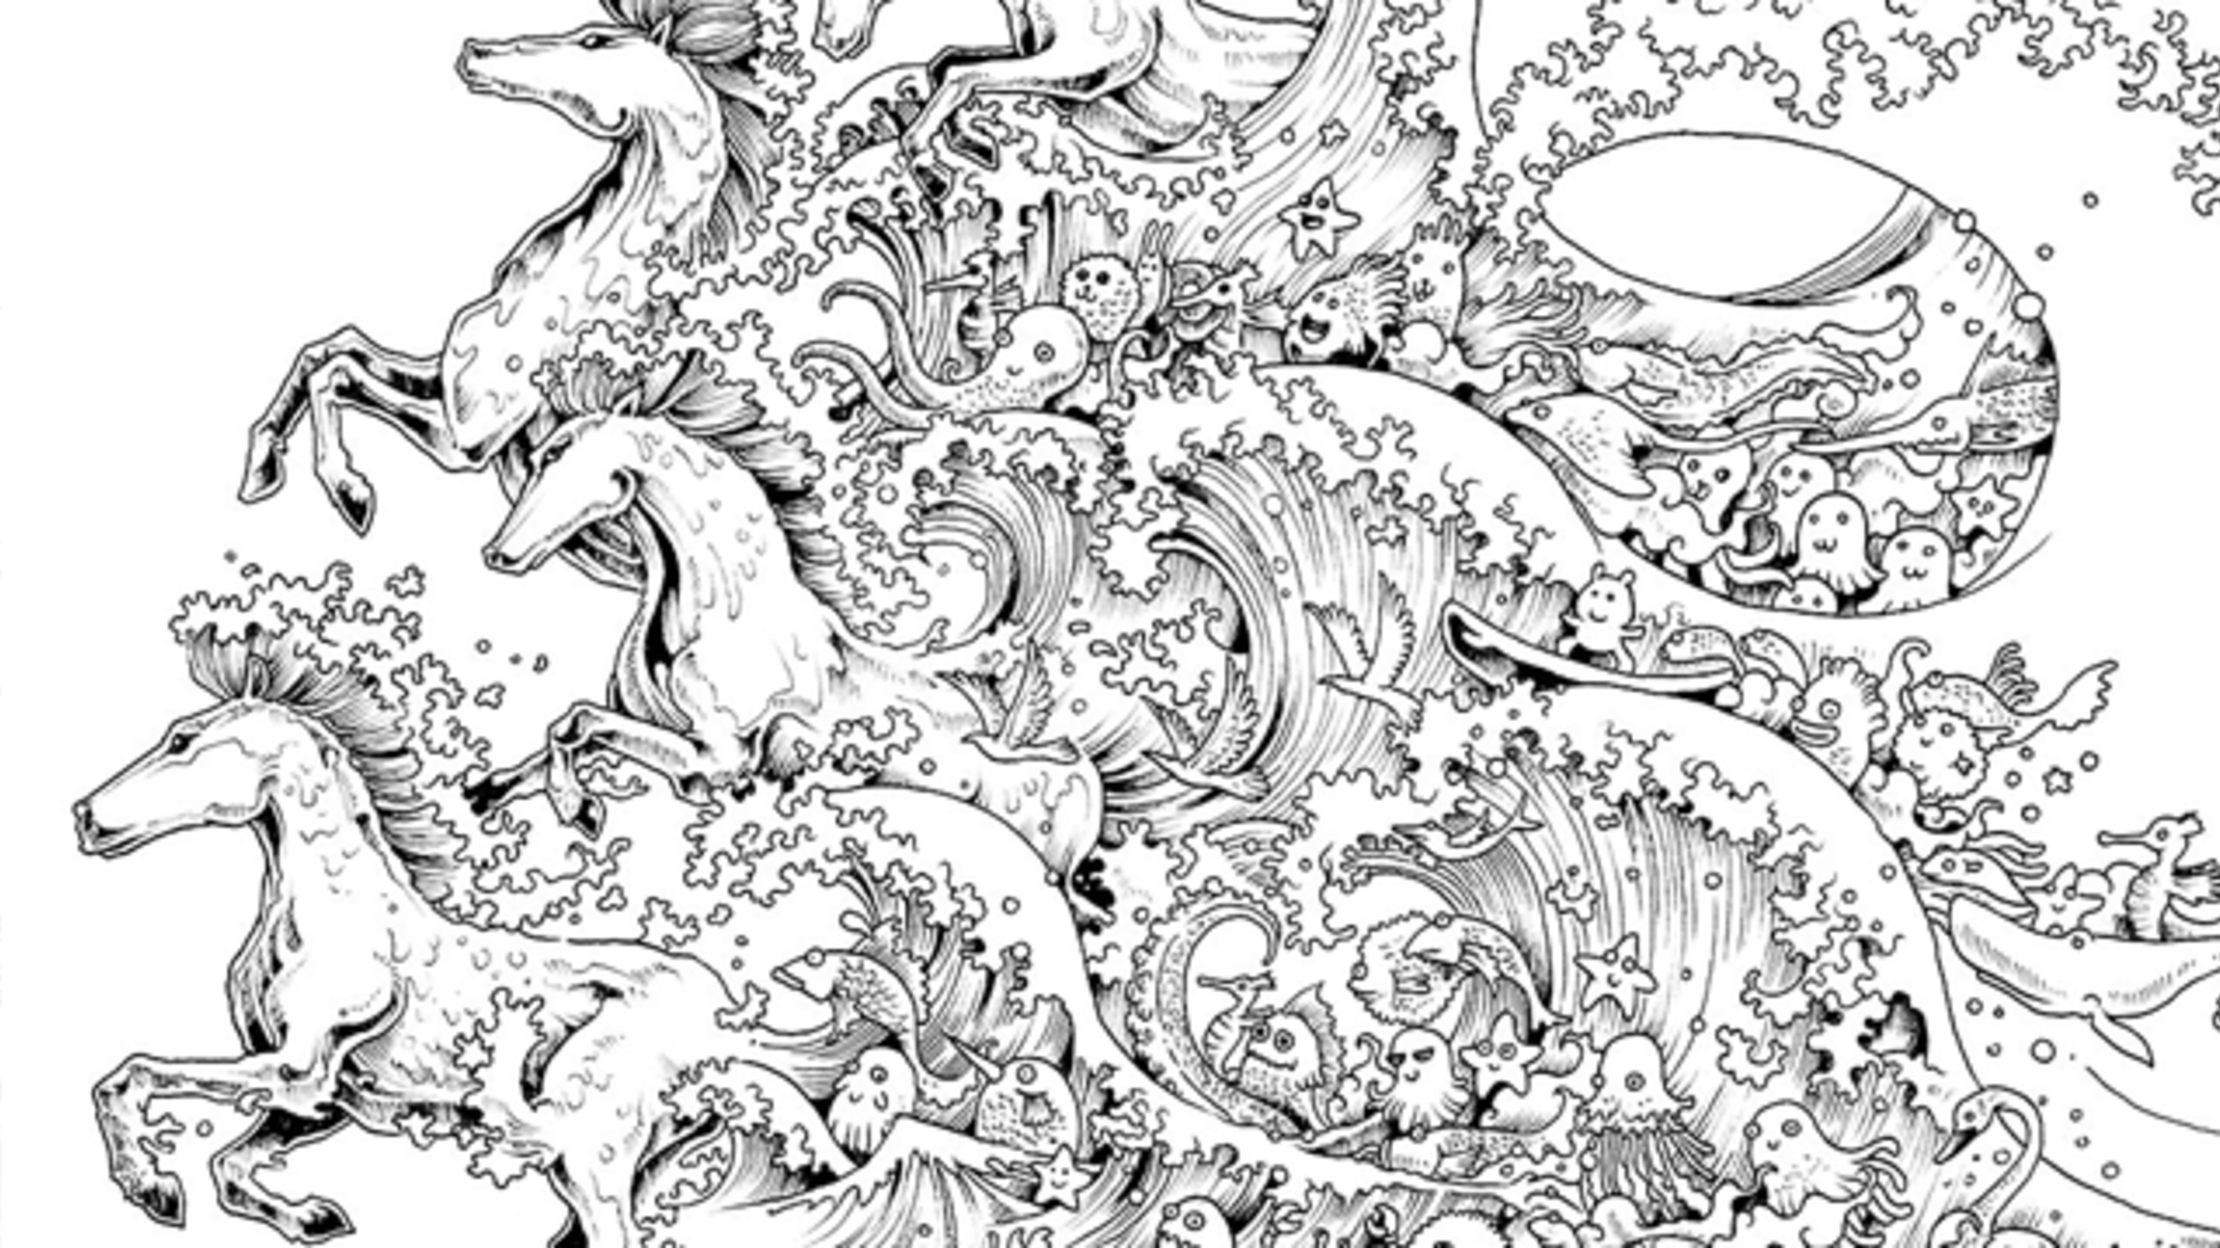 10 Intricate Adult Coloring Books to Help You DeStress